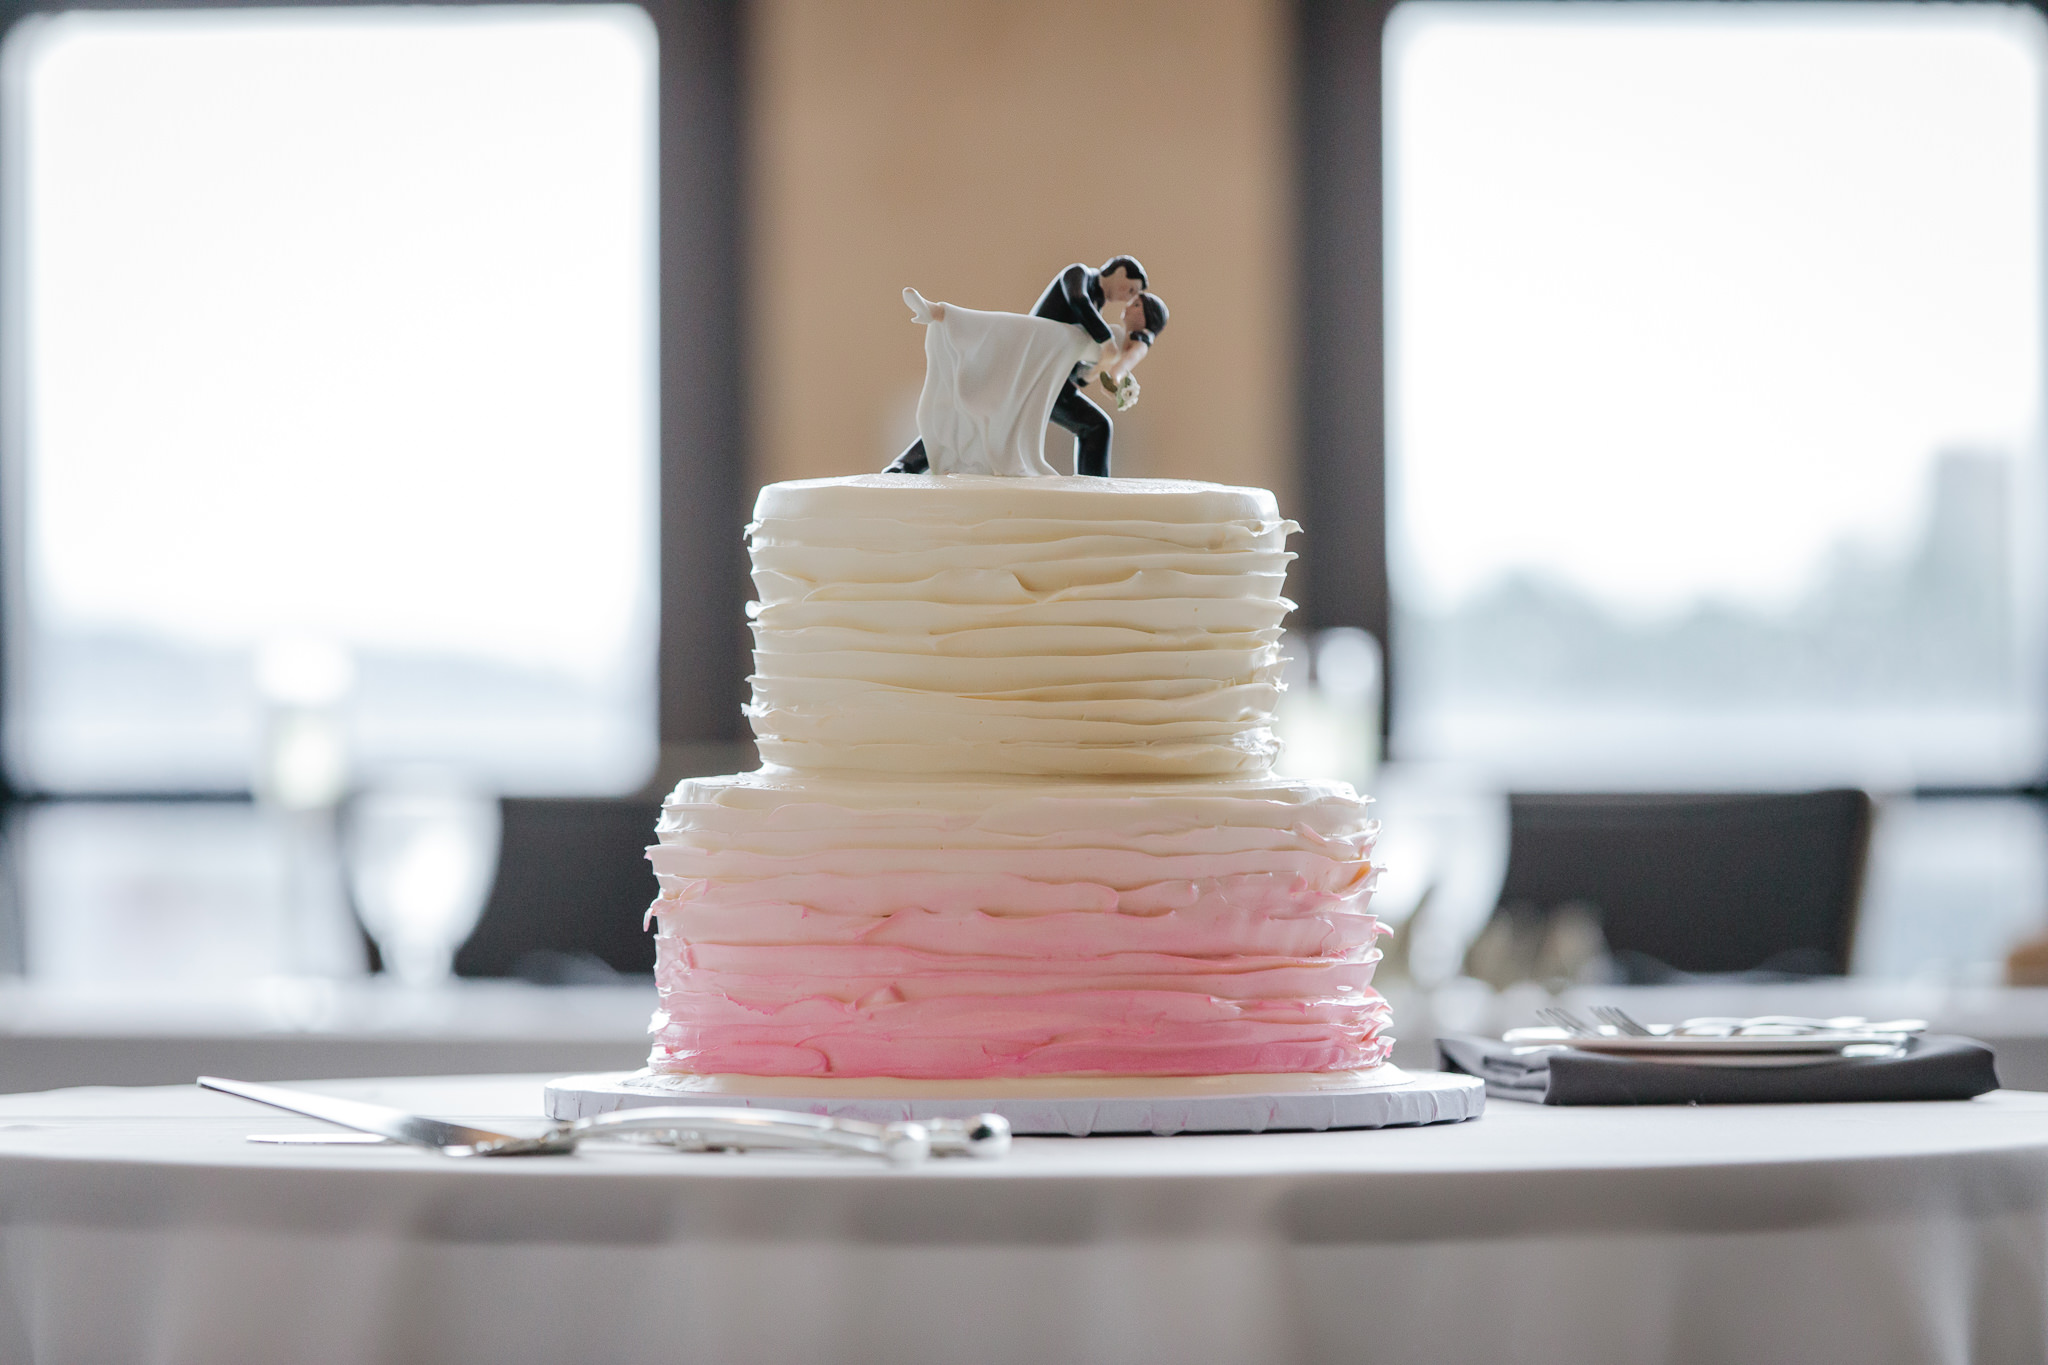 Ombre wedding cake at a Duquesne University wedding reception